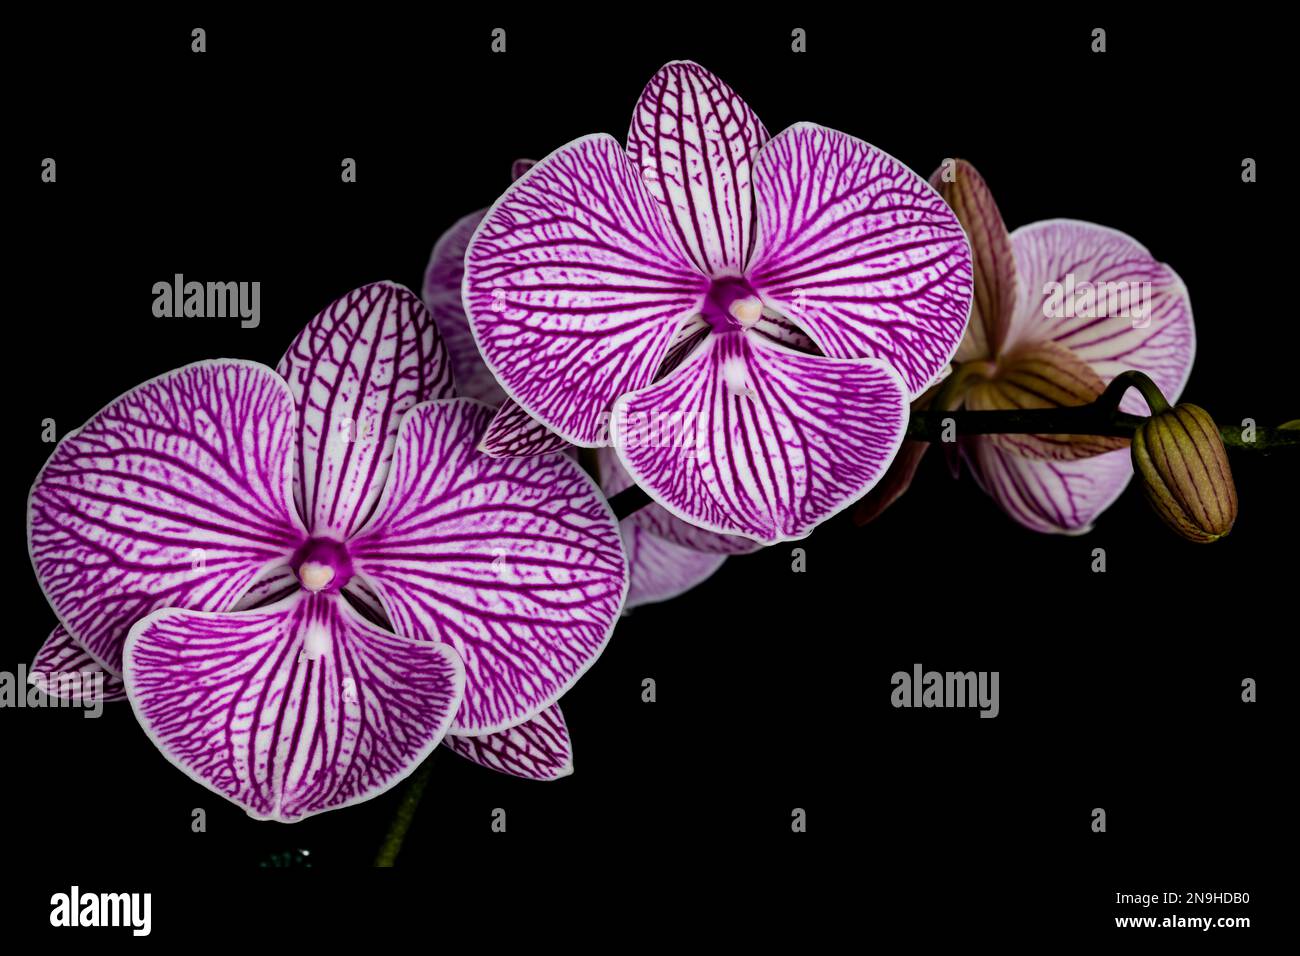 Purple-and-white striped orchids with black backdrop. Stock Photo